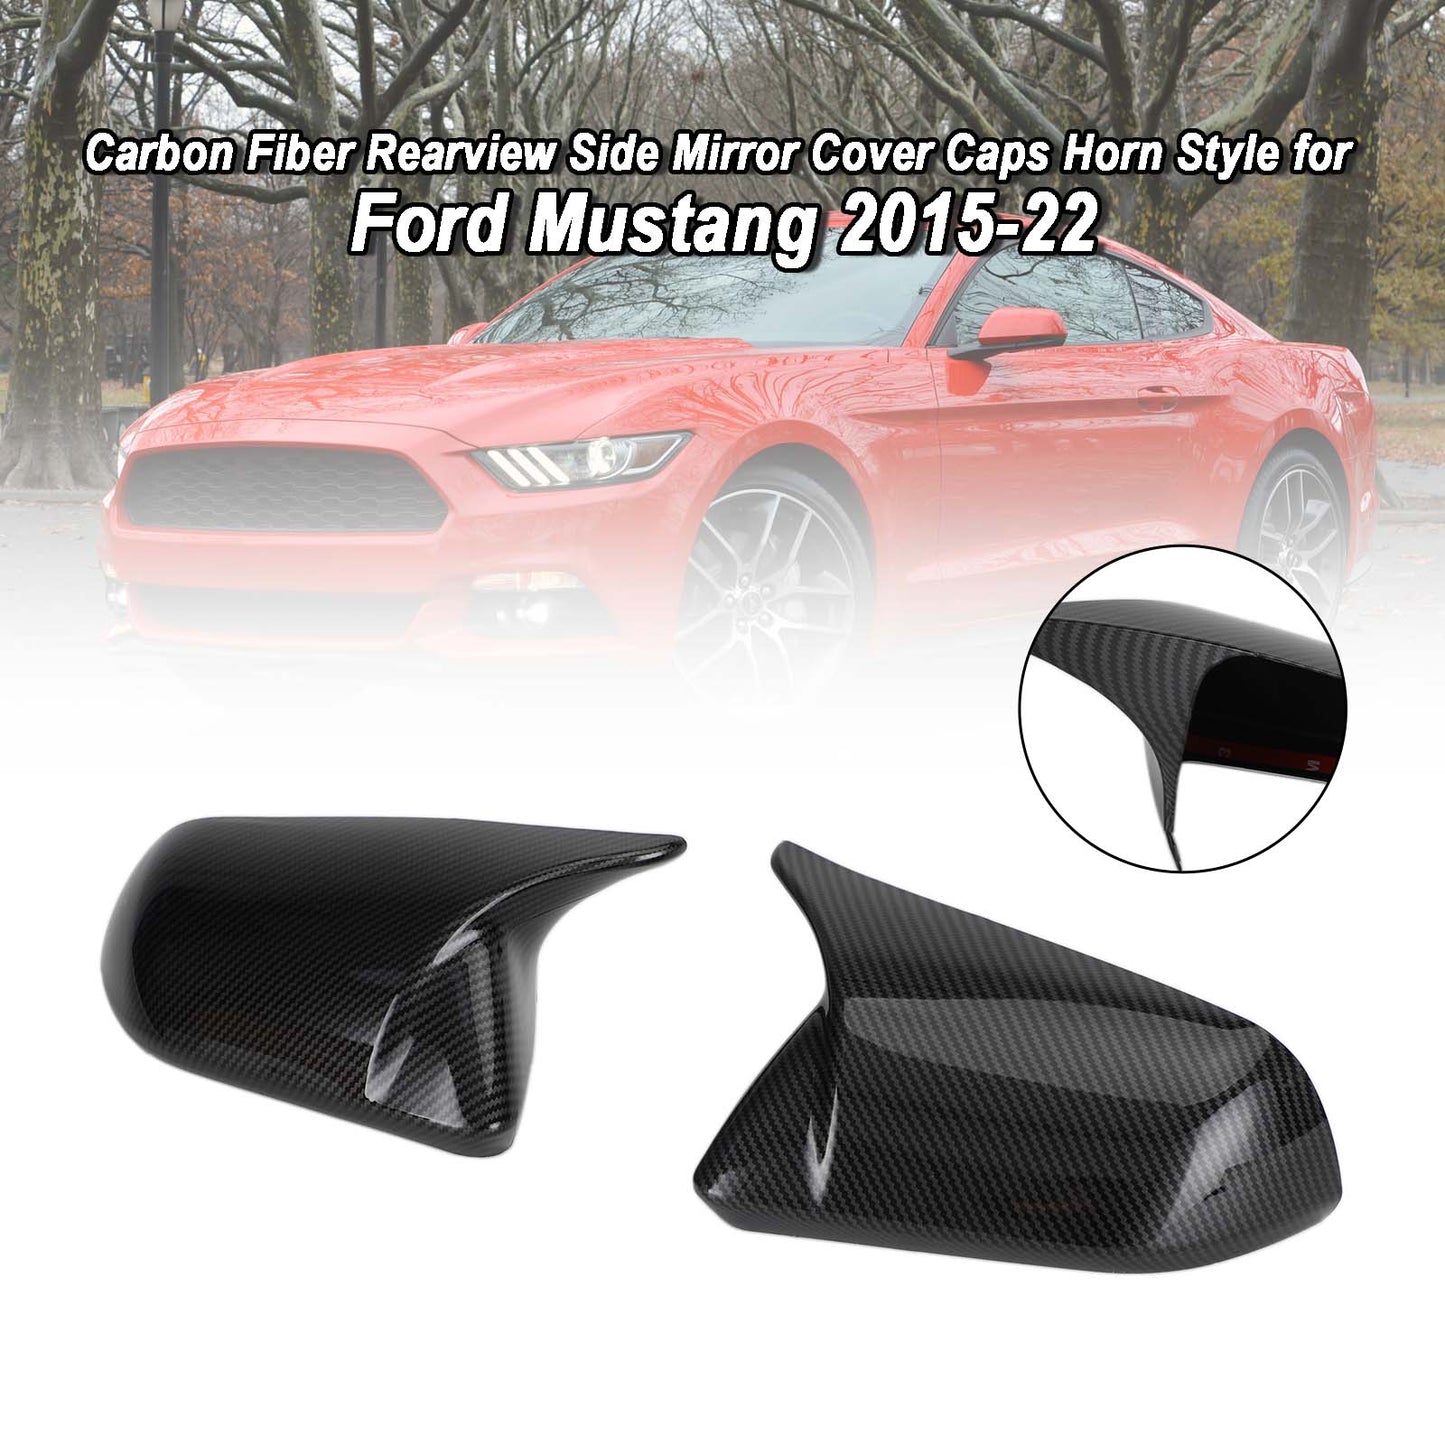 2015-2022 Ford Mustang Carbon Fiber Rearview Side Mirror Cover Caps Horn Style